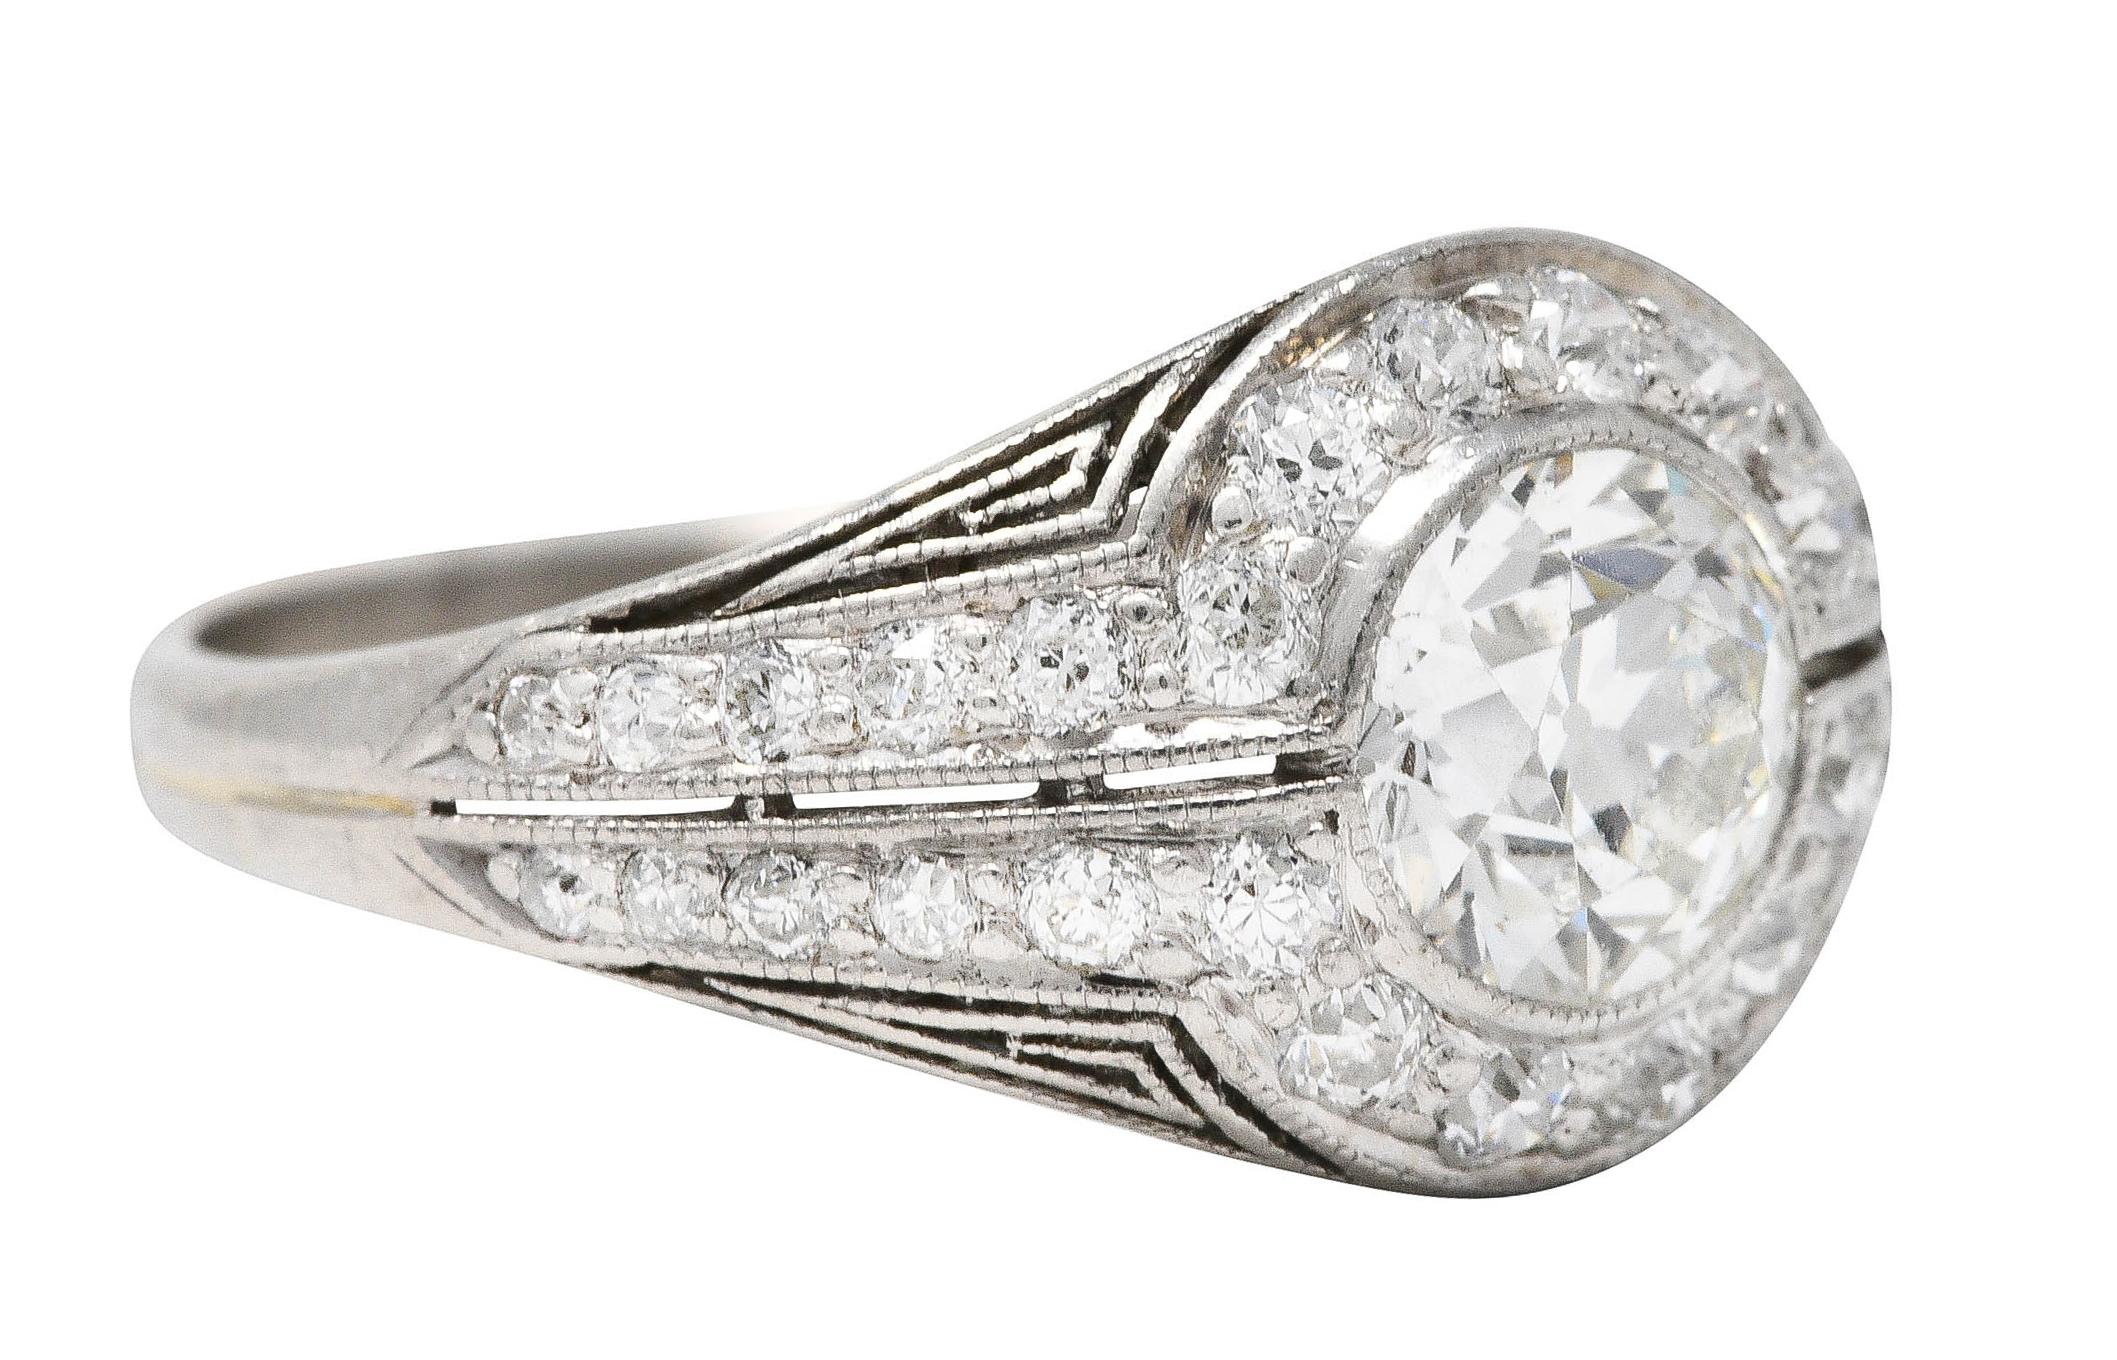 Bombè band ring features an old European cut diamond weighing approximately 0.70 carat - J color with VS clarity

Bezel set and surrounded by a round halo of old European cut diamonds

Then flanked by additional old European cut diamonds and single